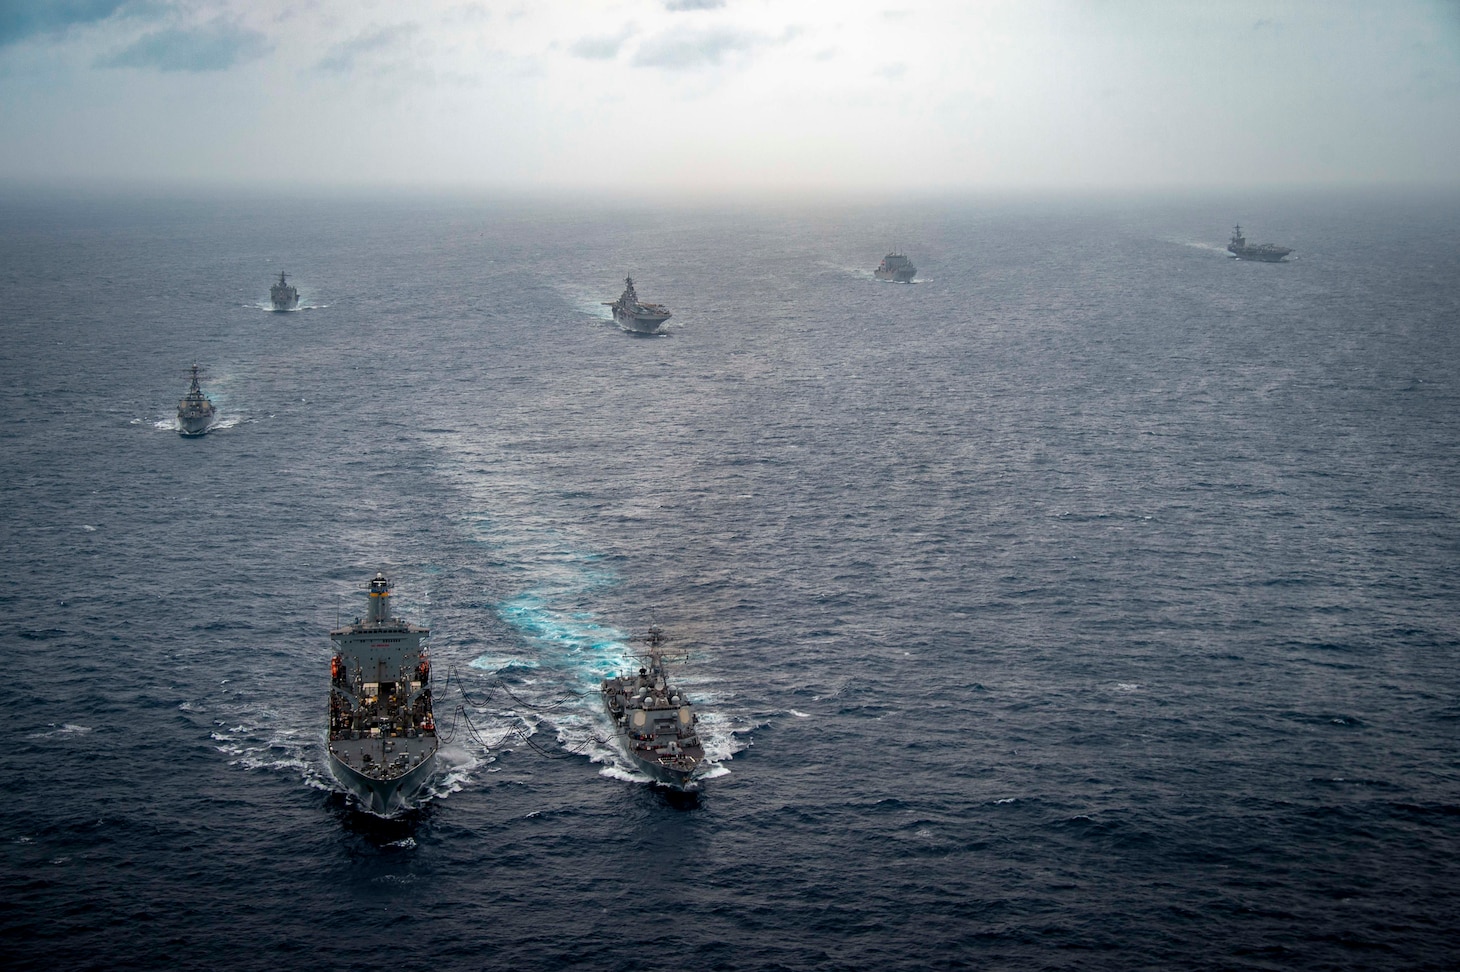 Henry J. Kaiser-class fleet replenishment oiler USNS John Ericsson (T-AO 194) conducts a replenishment-at-sea with Arleigh Burke-class guided-missile destroyer USS Michael Murphy (DDG 112) while transiting with Carl Vinson Carrier Strike Group (VINCSG) and Essex Amphibious Ready Group (ESX ARG) in the South China Sea, Jan. 13, 2022. VINCSG and ESX ARG are conducting joint expeditionary strike force operations in the South China Sea as part of continuing and routine interoperability training operations in the Indo-Pacific region.